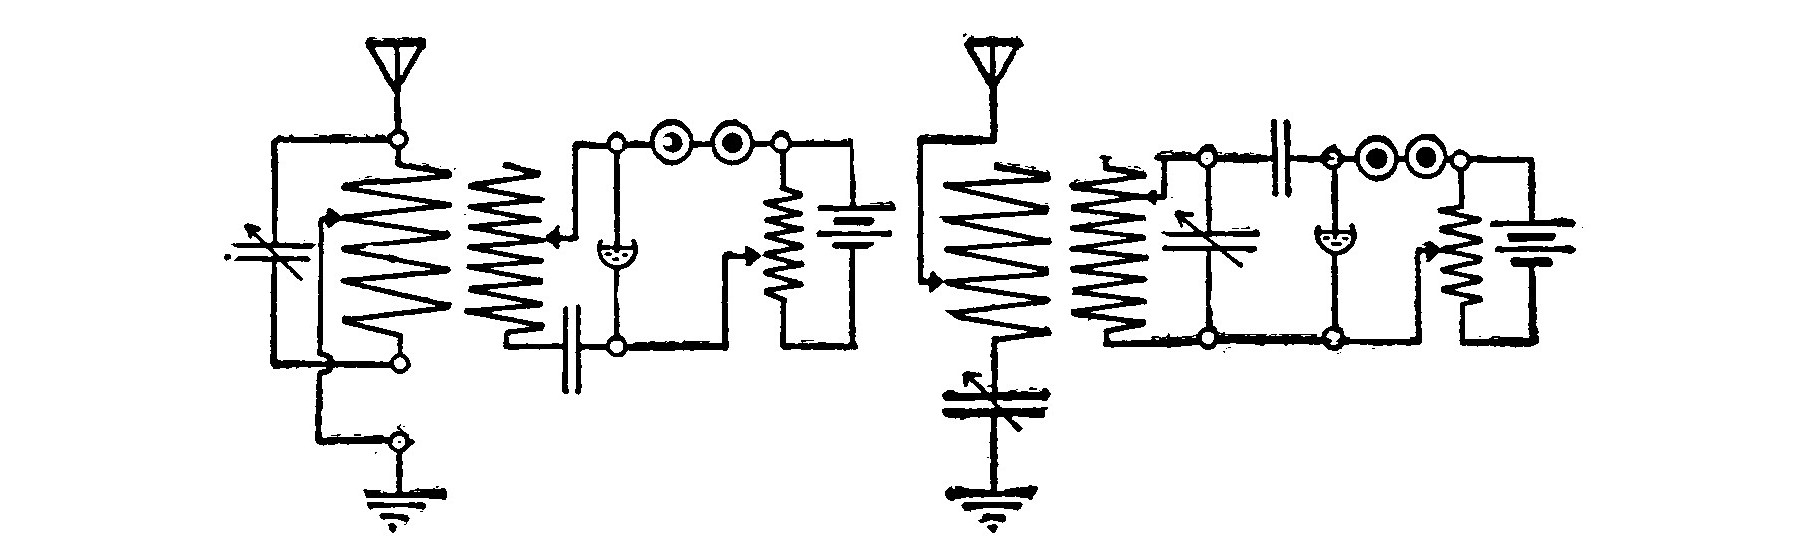 Fig. 131. Loosely Coupled Tuning Circuits.